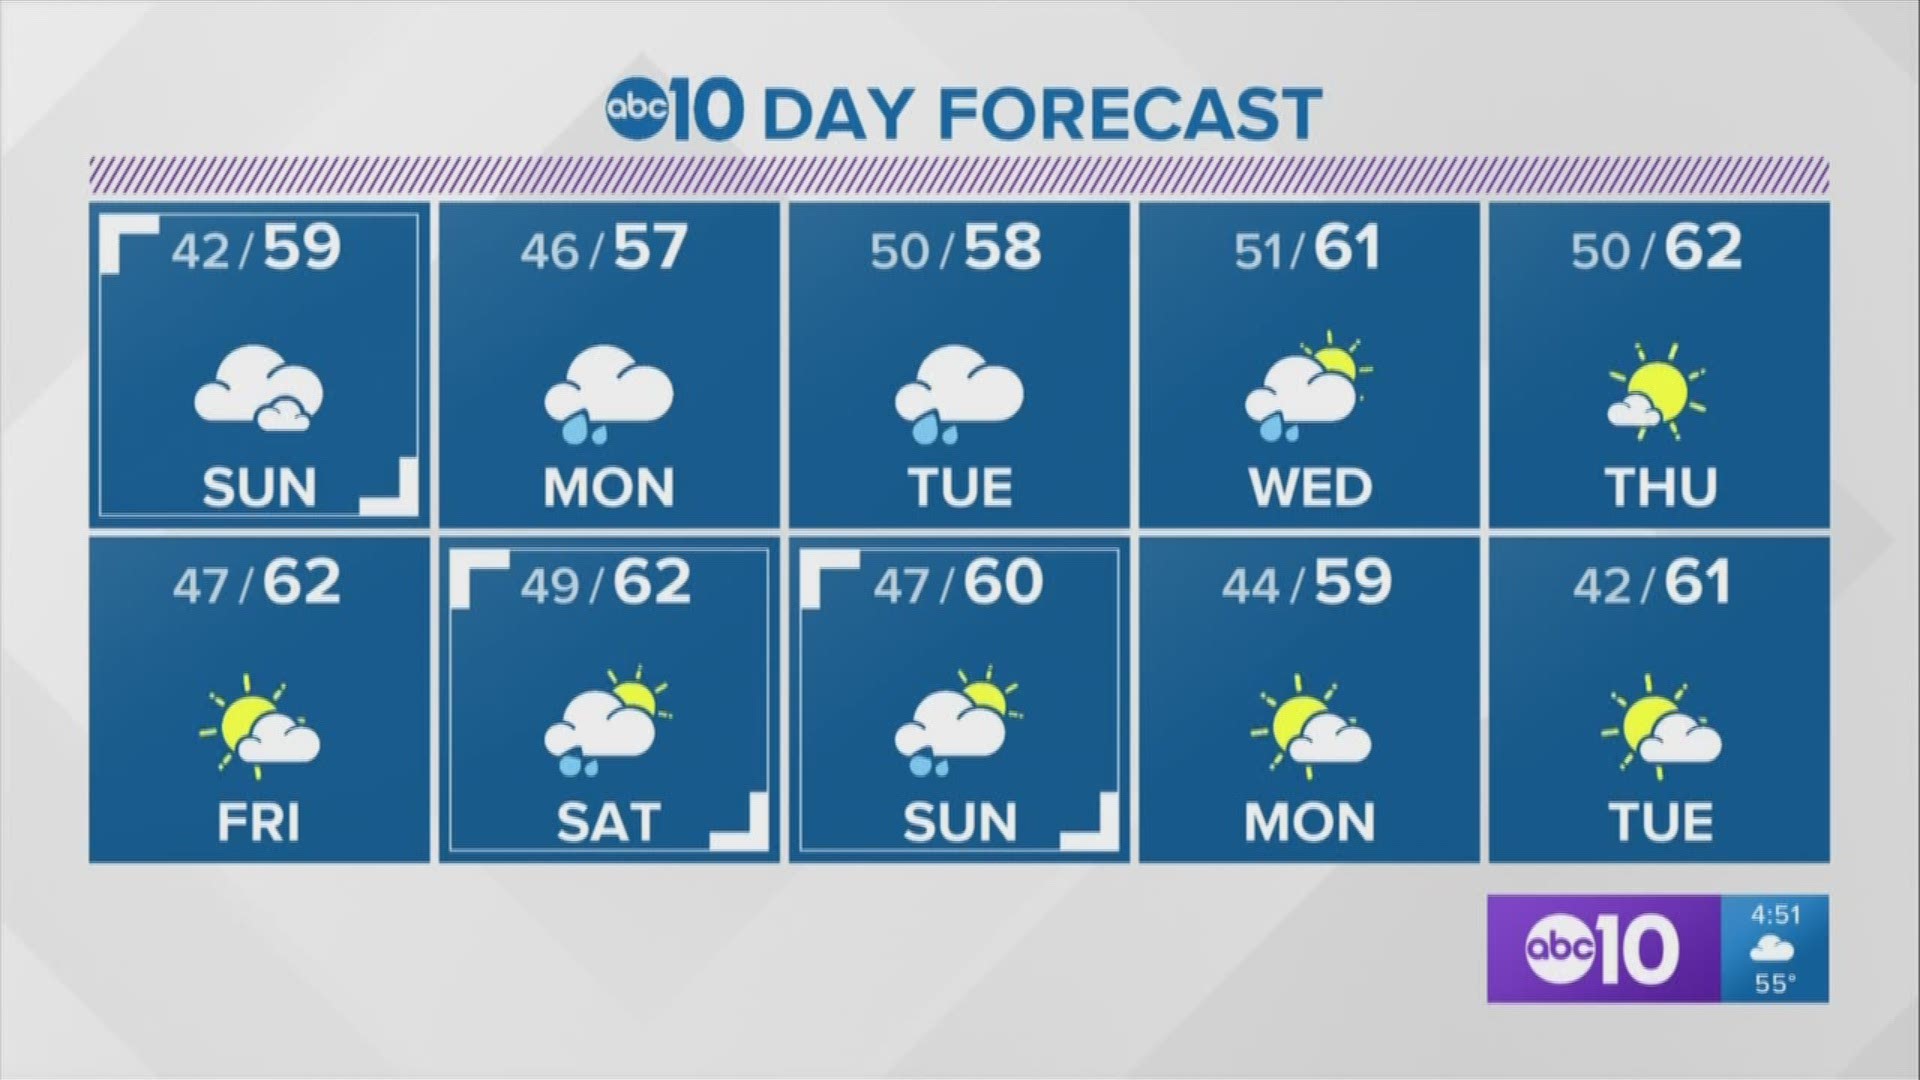 Clouds on approach for Sunday with showers likely Monday